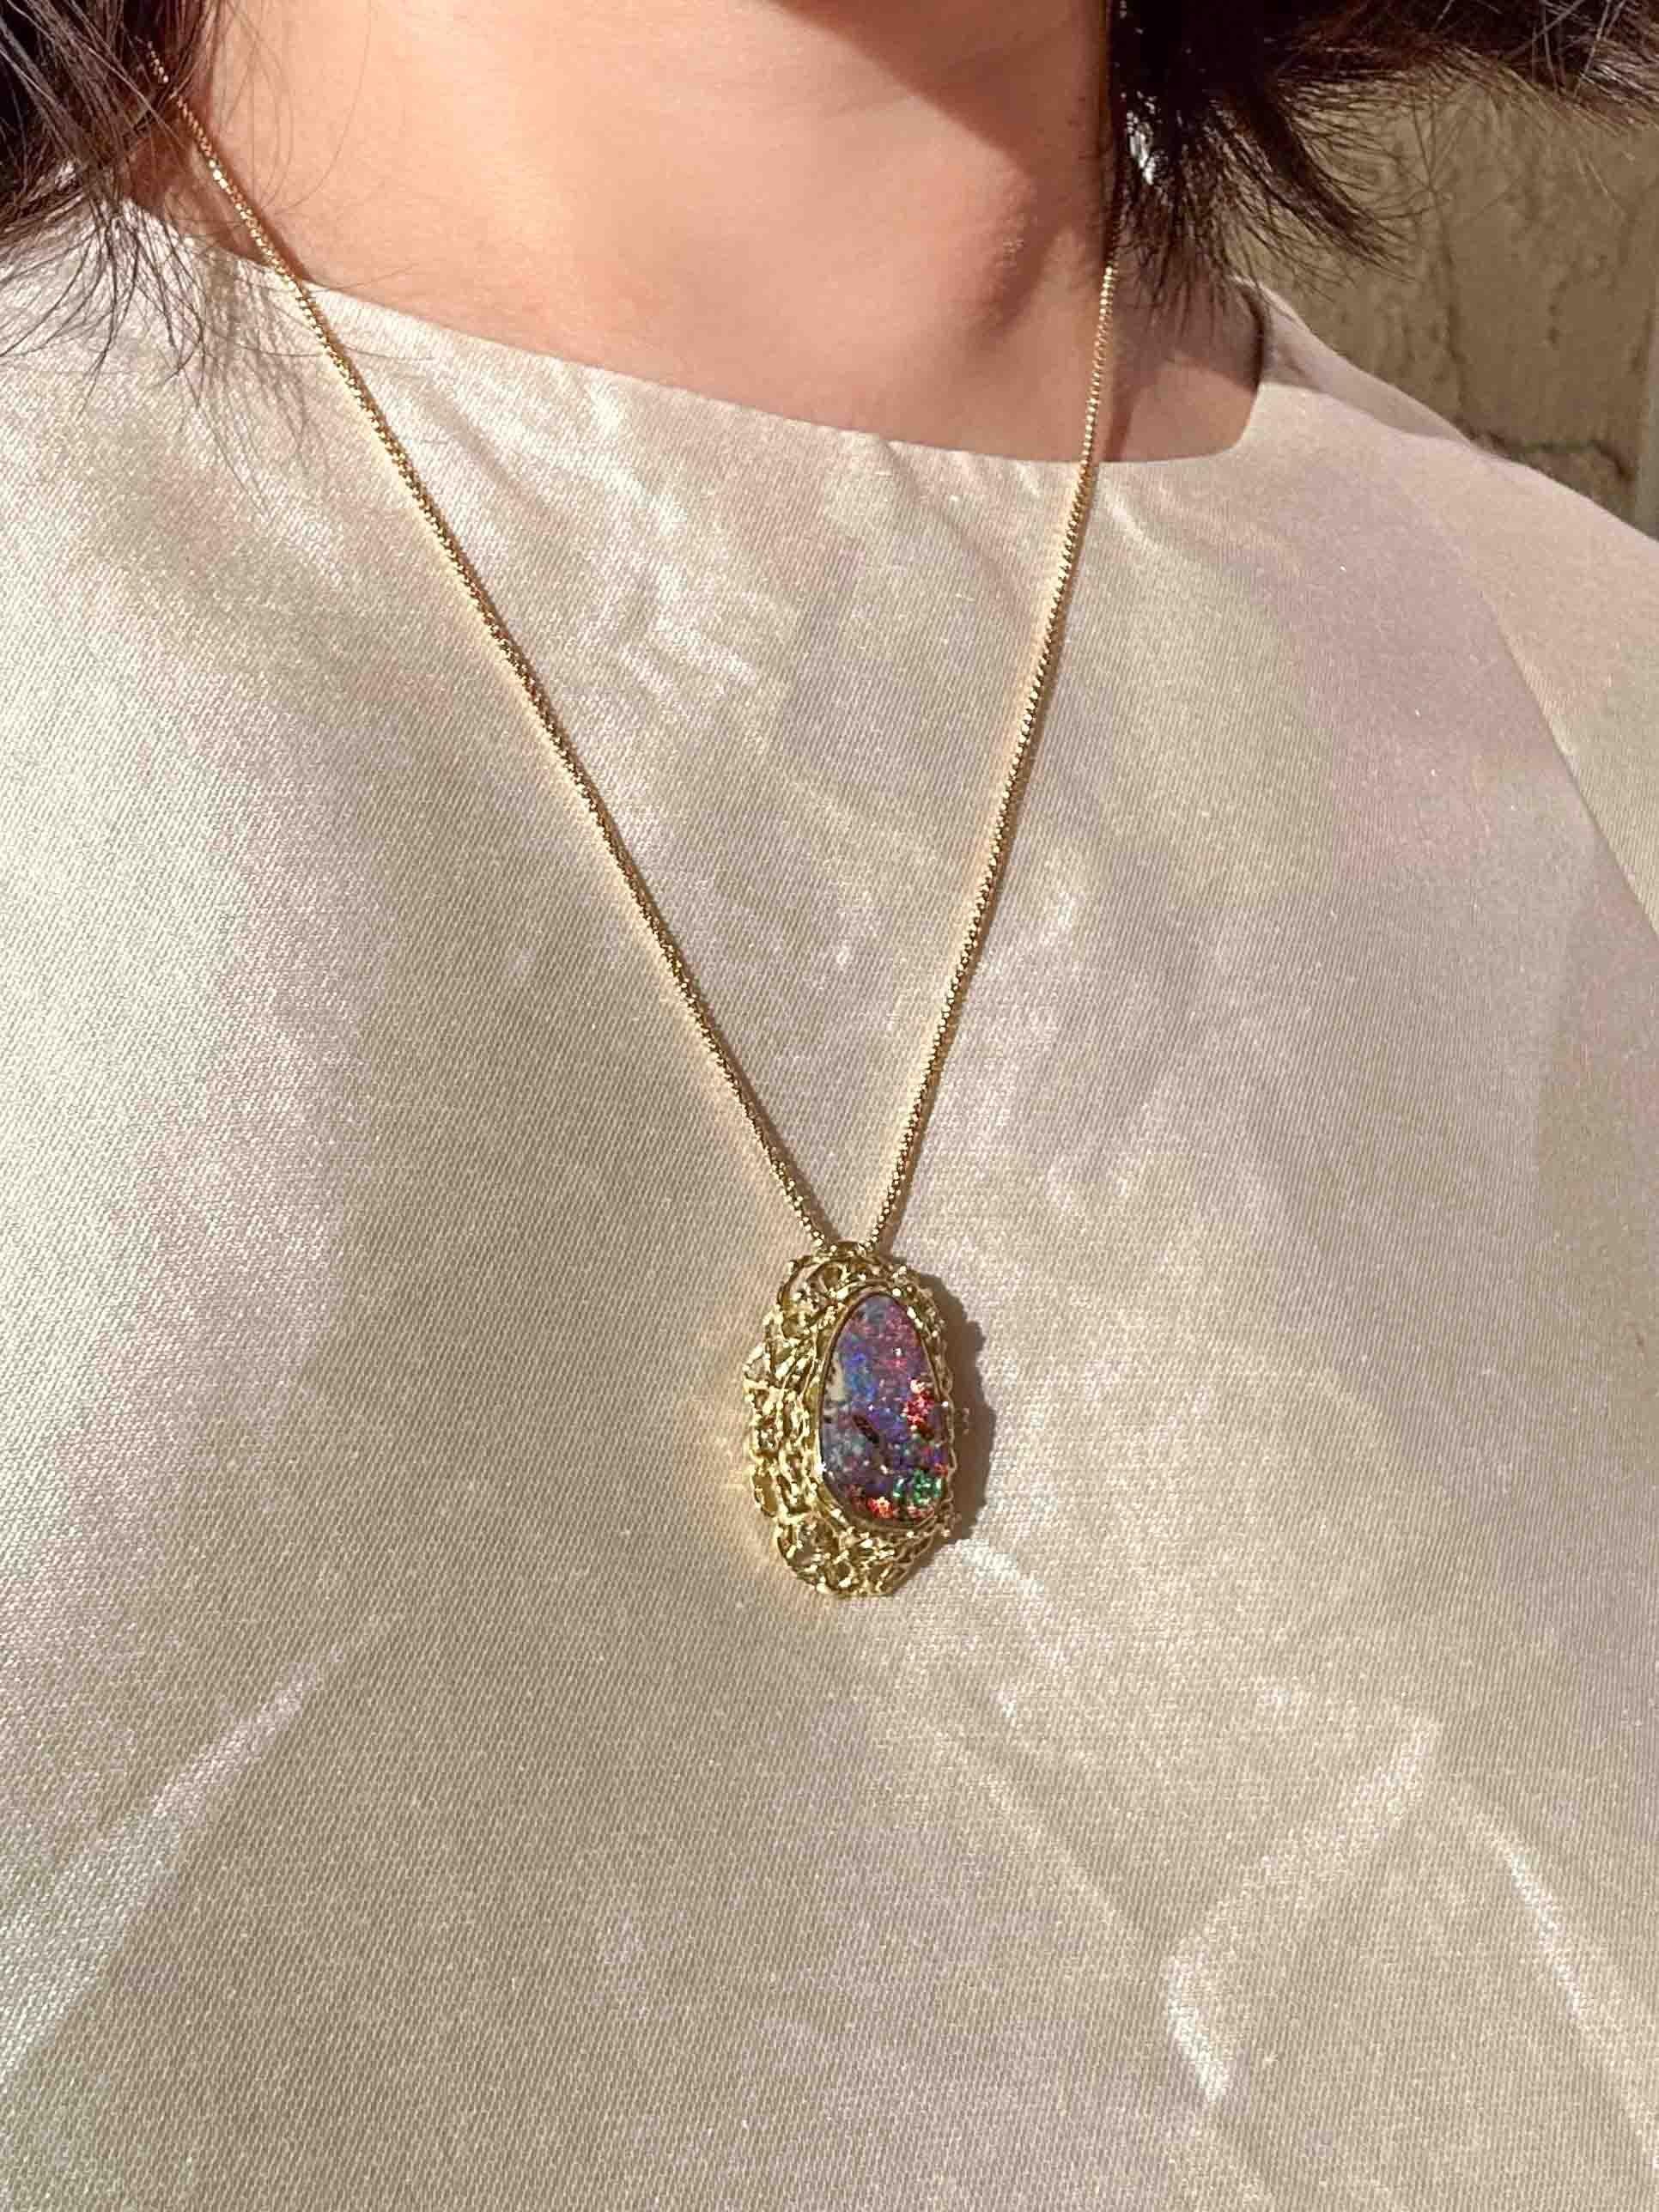 Australian Boulder Opal and Diamond Pendant with Chain 18K Gold 10.38g V1125 For Sale 4